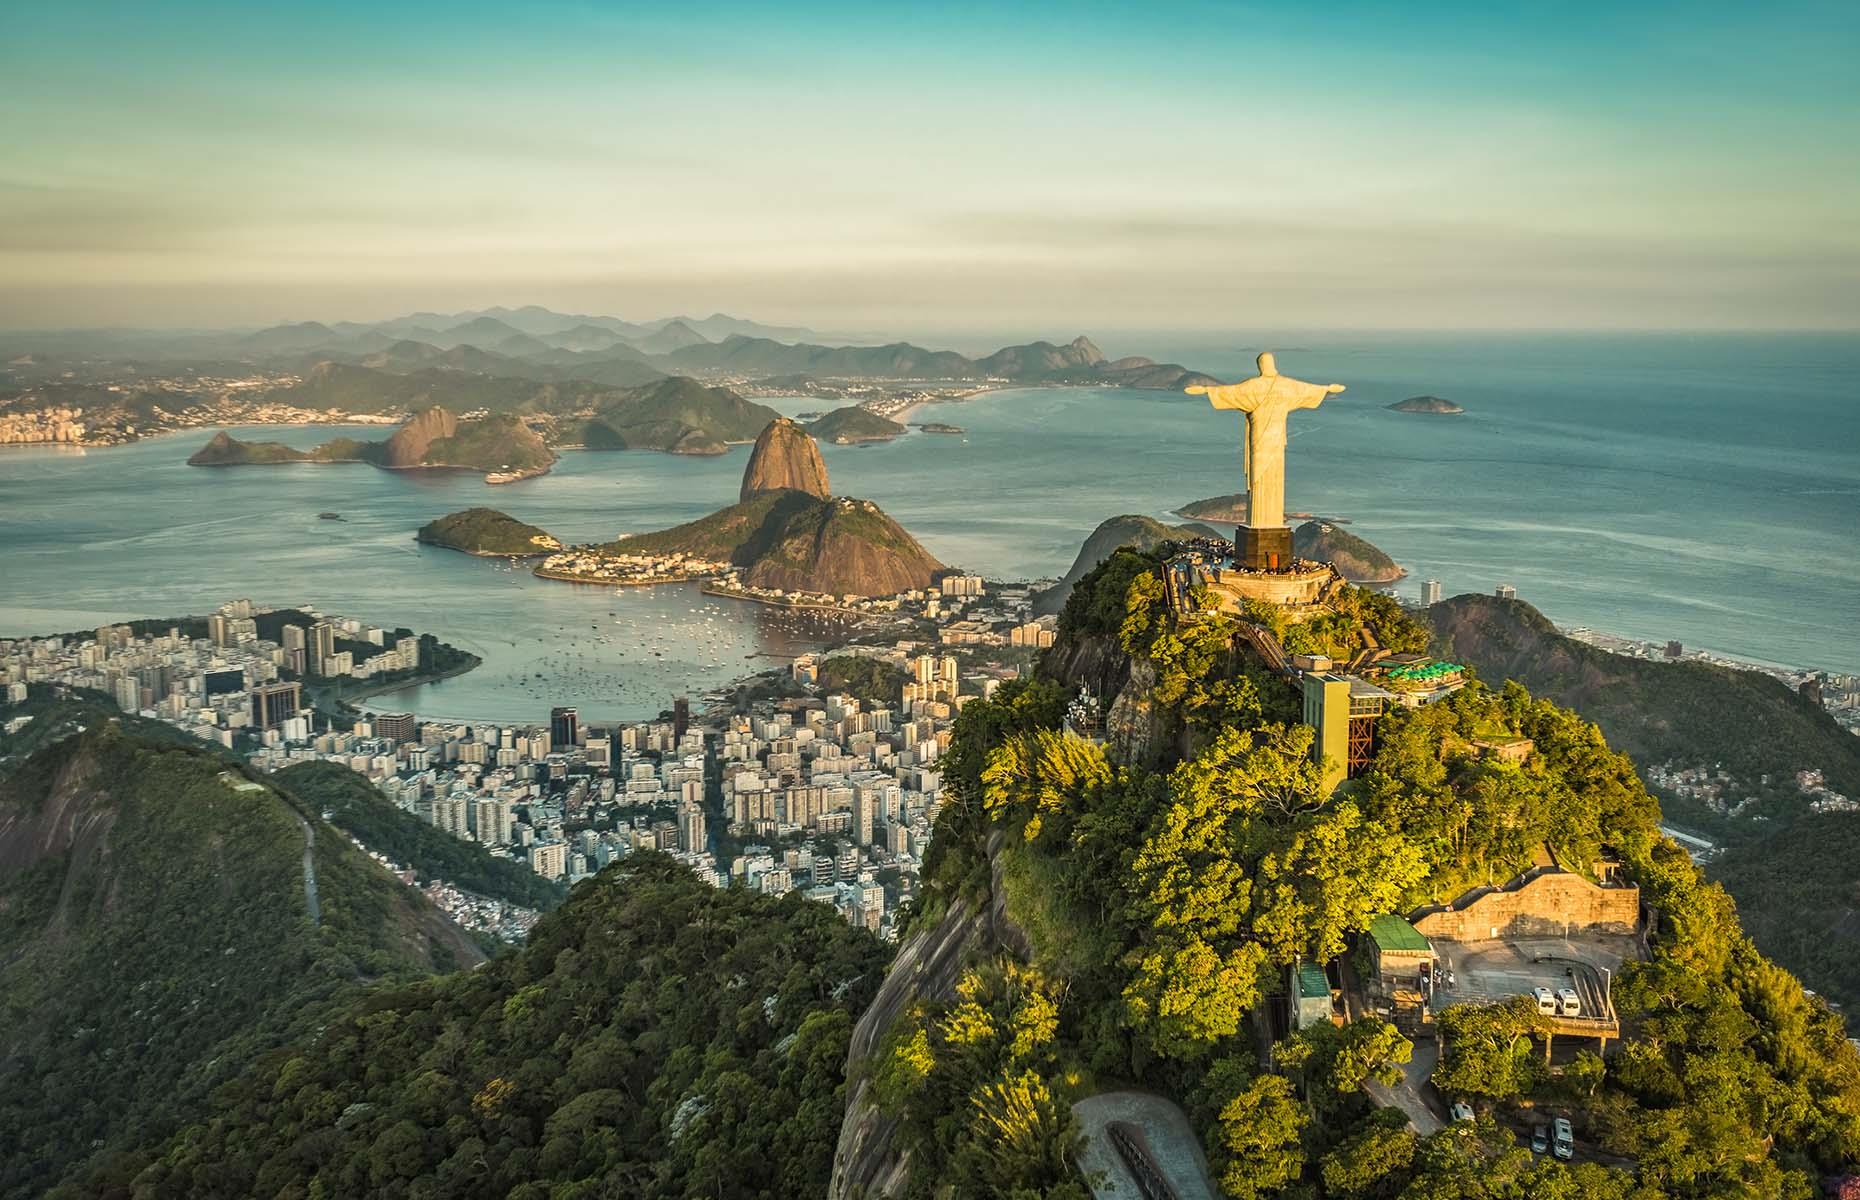 <p>You can rattle off all the statistics you like about Rio de Janeiro’s iconic Christ the Redeemer statue: 98 feet high (30m) on a 26-foot-high (8m) pedestal; fourth largest statue of Jesus Christ in the world and largest Art Deco statue on the planet – but its position atop Corcovado Mountain makes it truly special. Overlooking Rio with Christ’s arms outstretched, this statue, carved from soapstone, can be glimpsed from most parts of the city and is a true cultural icon for both Rio and Brazil. <strong>Score: 6.83</strong></p>